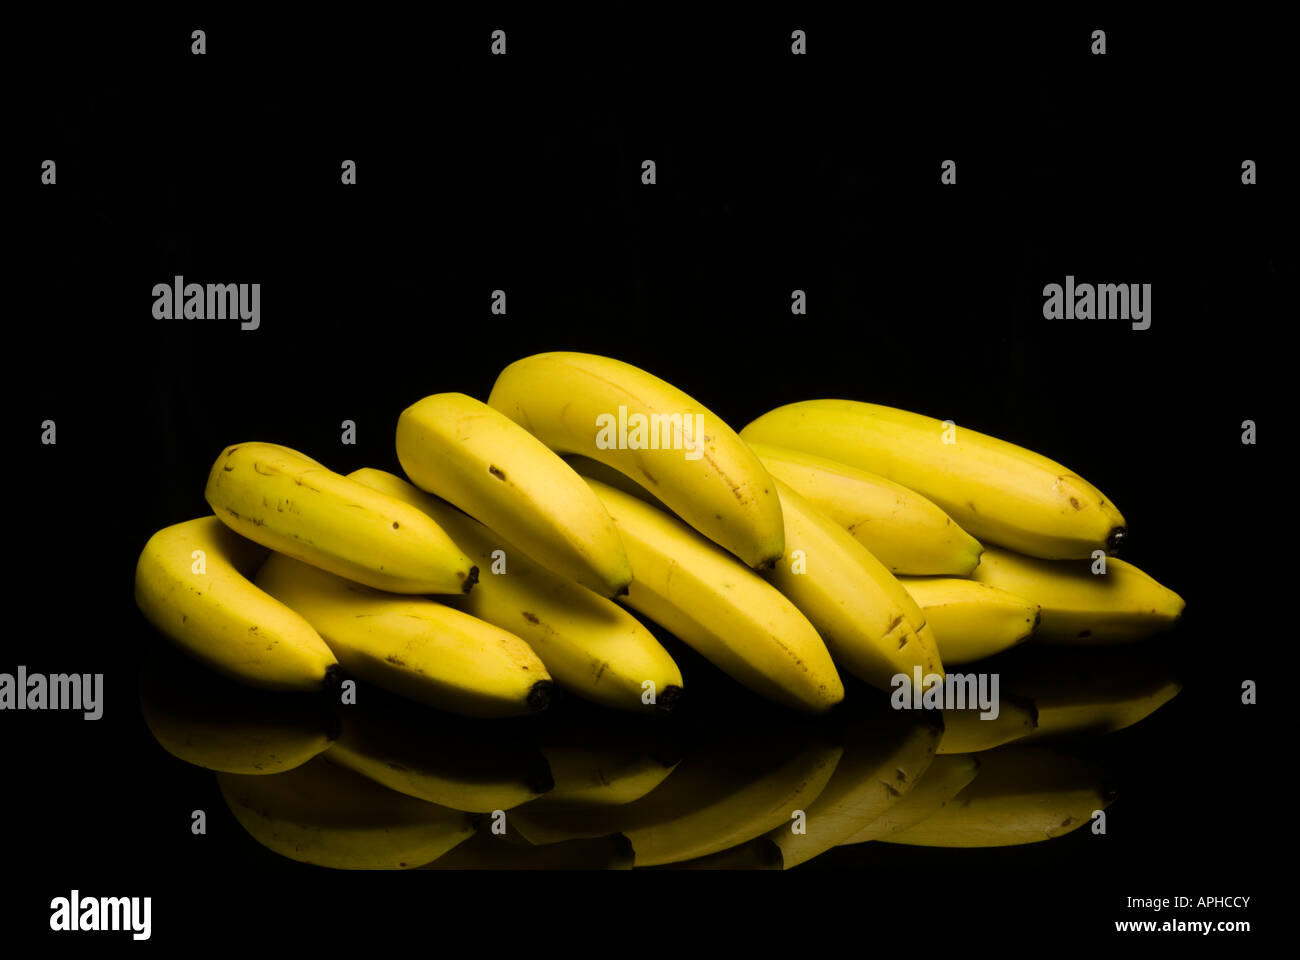 Landscape image showing three bunches of ripened Free Trade bananas on a black background Stock Photo